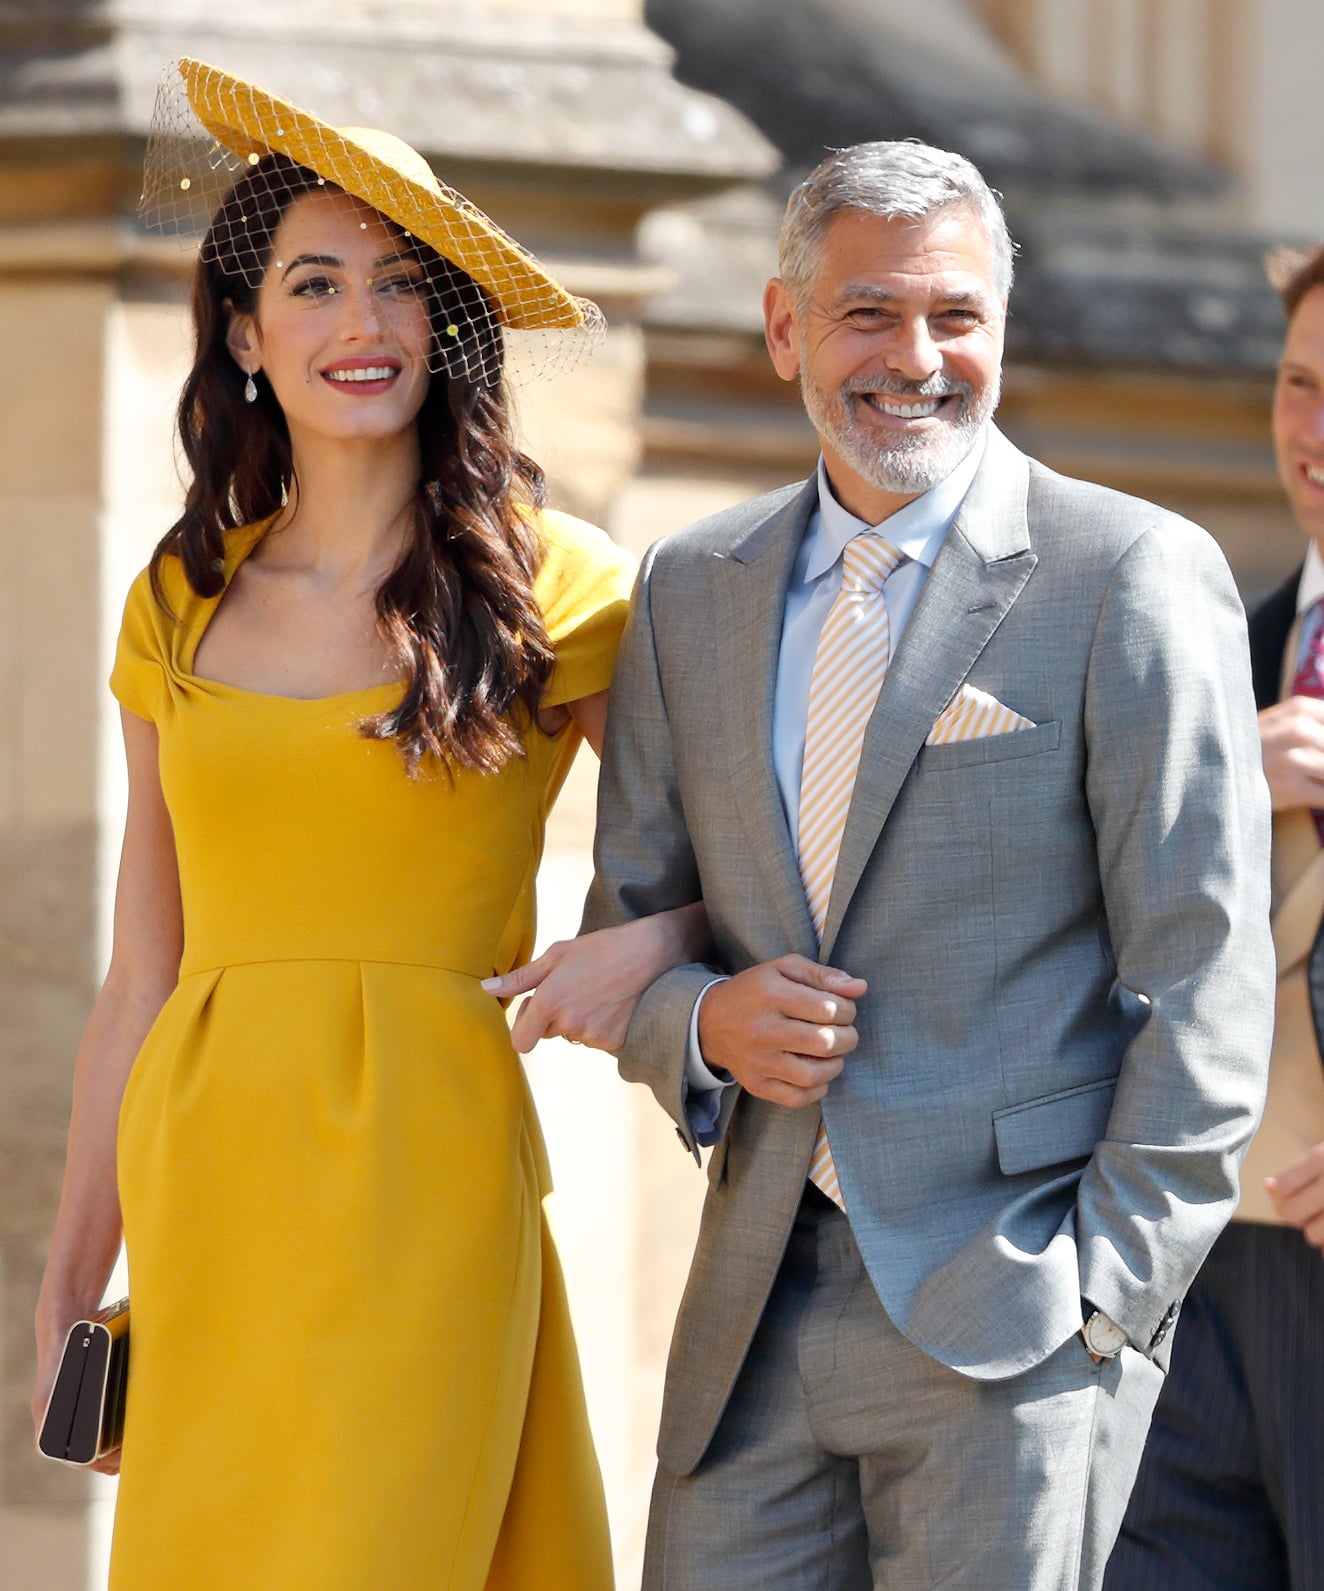 WINDSOR, UNITED KINGDOM - MAY 19: (EMBARGOED FOR PUBLICATION IN UK NEWSPAPERS UNTIL 24 HOURS AFTER CREATE DATE AND TIME) Amal Clooney and George Clooney attend the wedding of Prince Harry to Ms Meghan Markle at St George